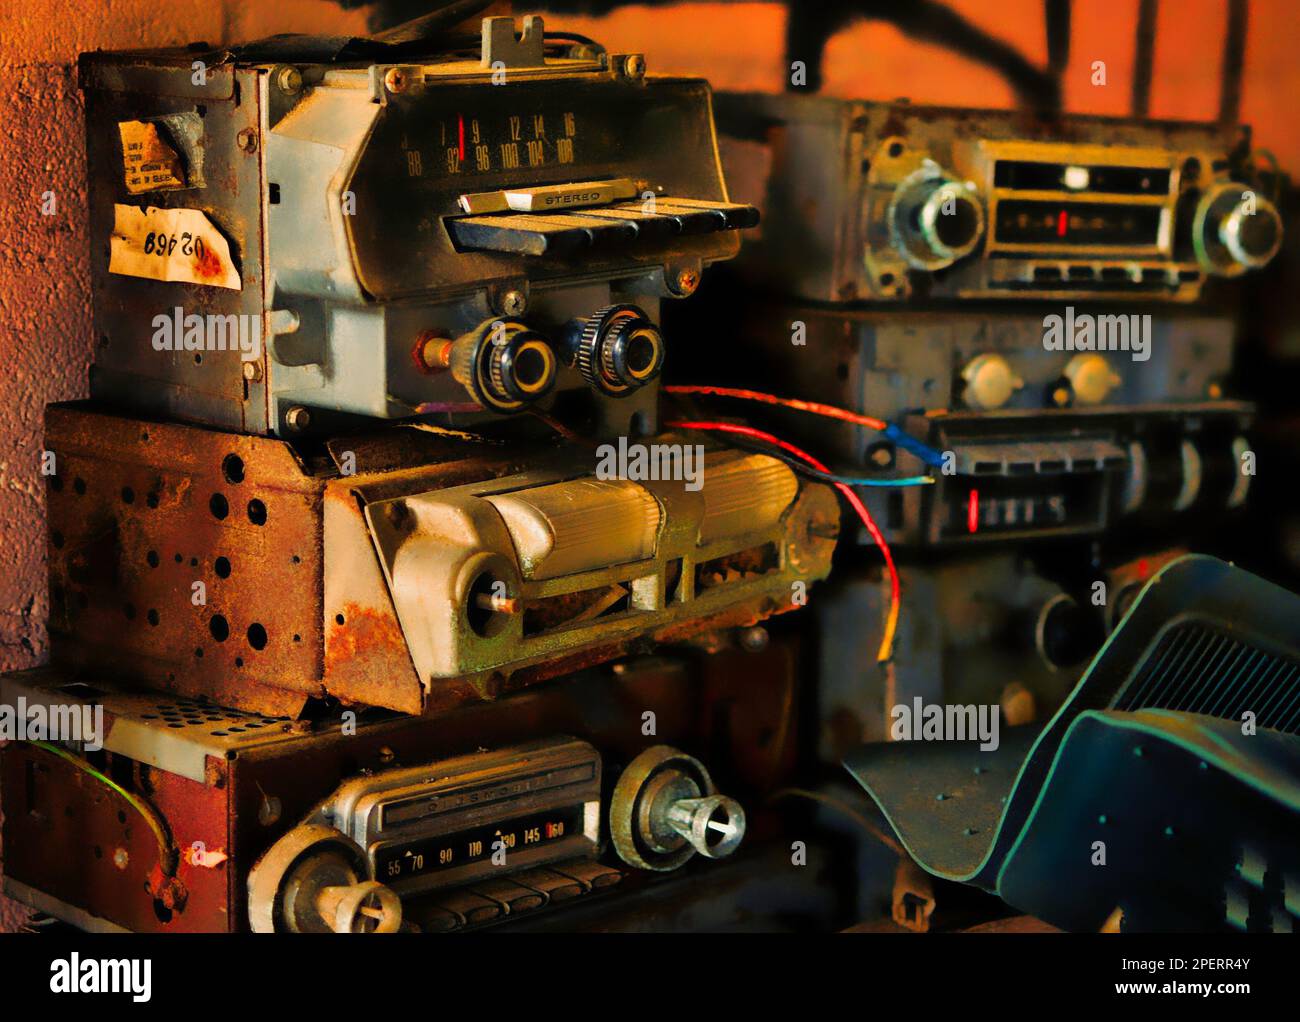 An array of vintage radios are situated inside a workshop as part of a repair process Stock Photo